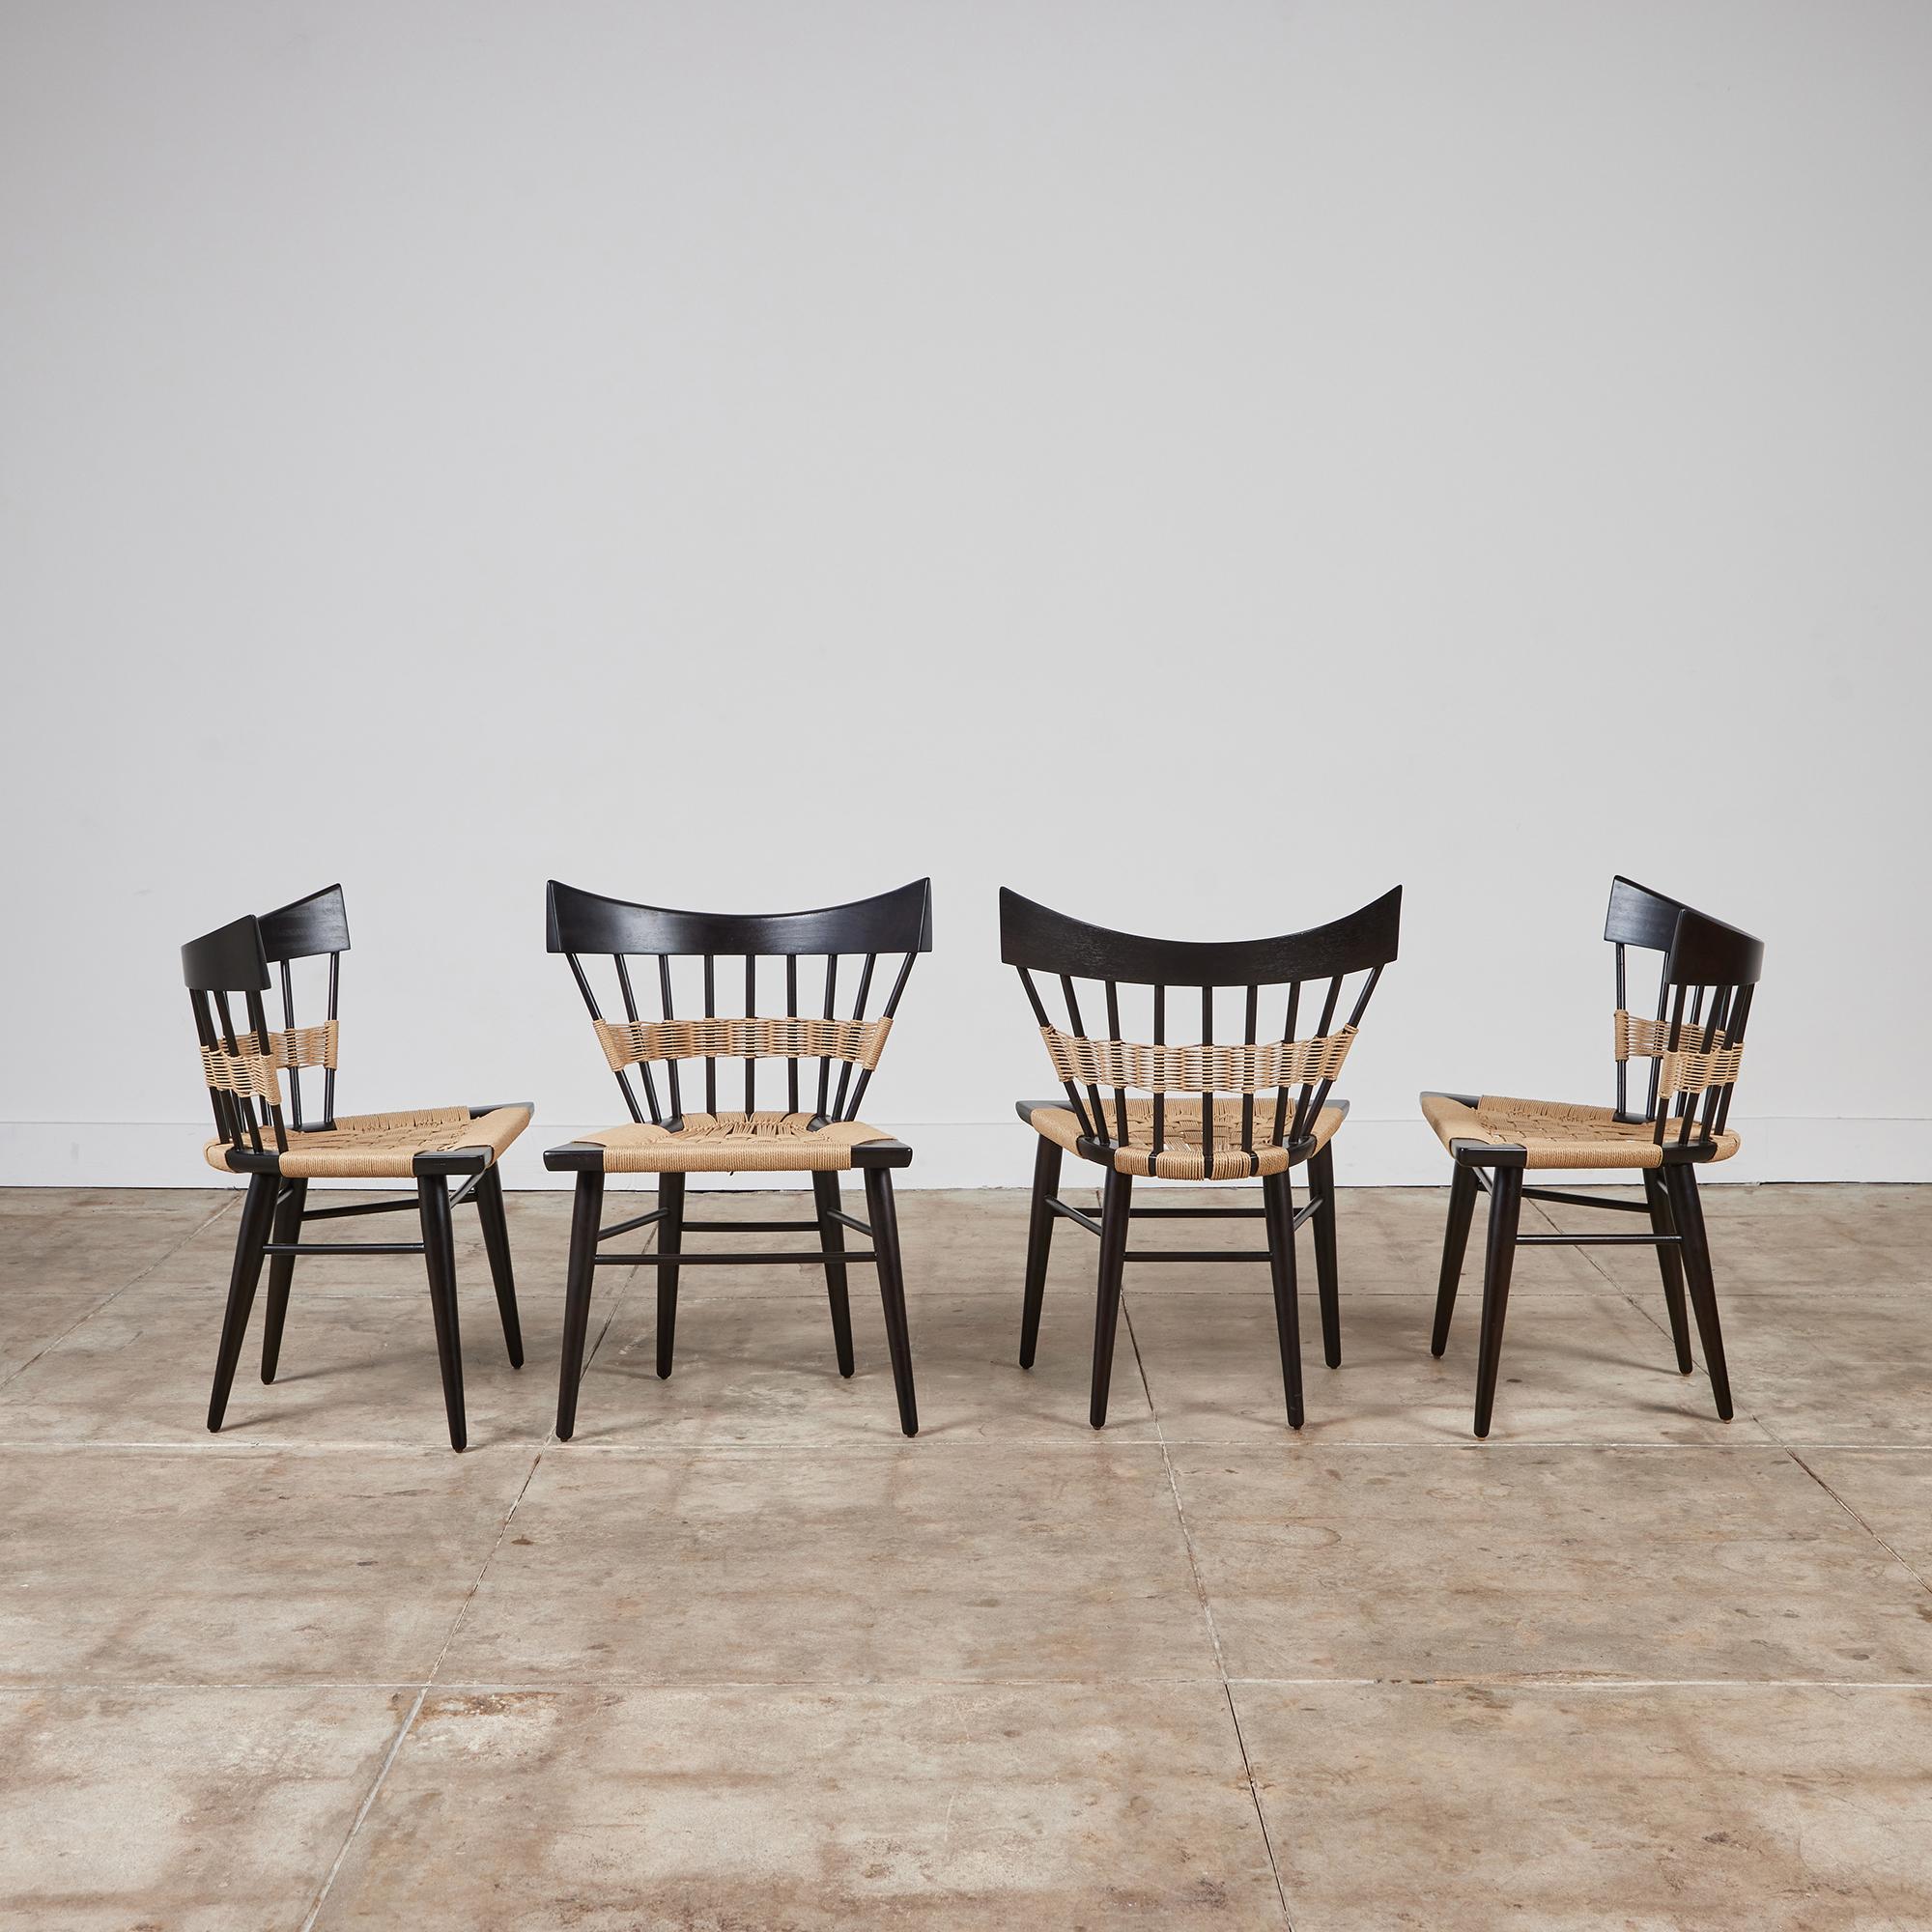 Set of four “Yucatan” chairs by Edmond Spence for Industria Mueblera in Mexico, circa 1950s. The chairs feature a unique and hand sculpted Japanese-inspired interpretation of a traditional spindle back chair similar to the shape of Paul McCobb’s